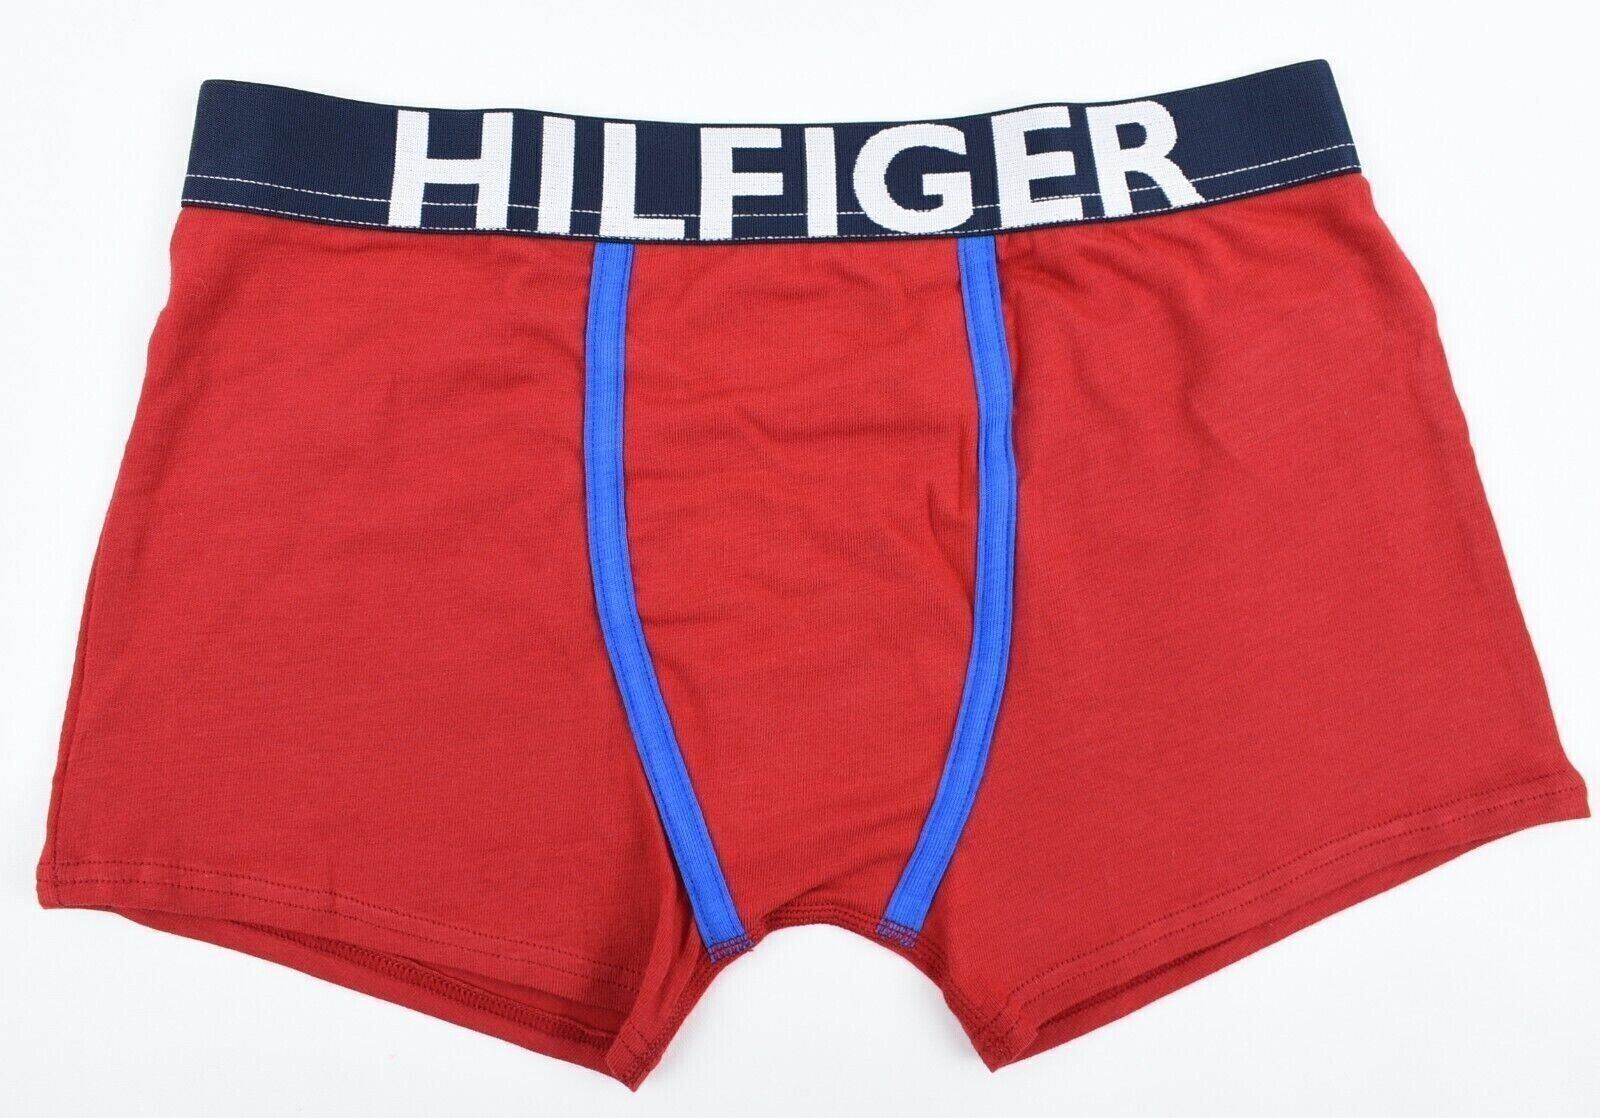 TOMMY HILFIGER Boys 2-pk Boxer Trunks, Red & Blue, size 6-7 years